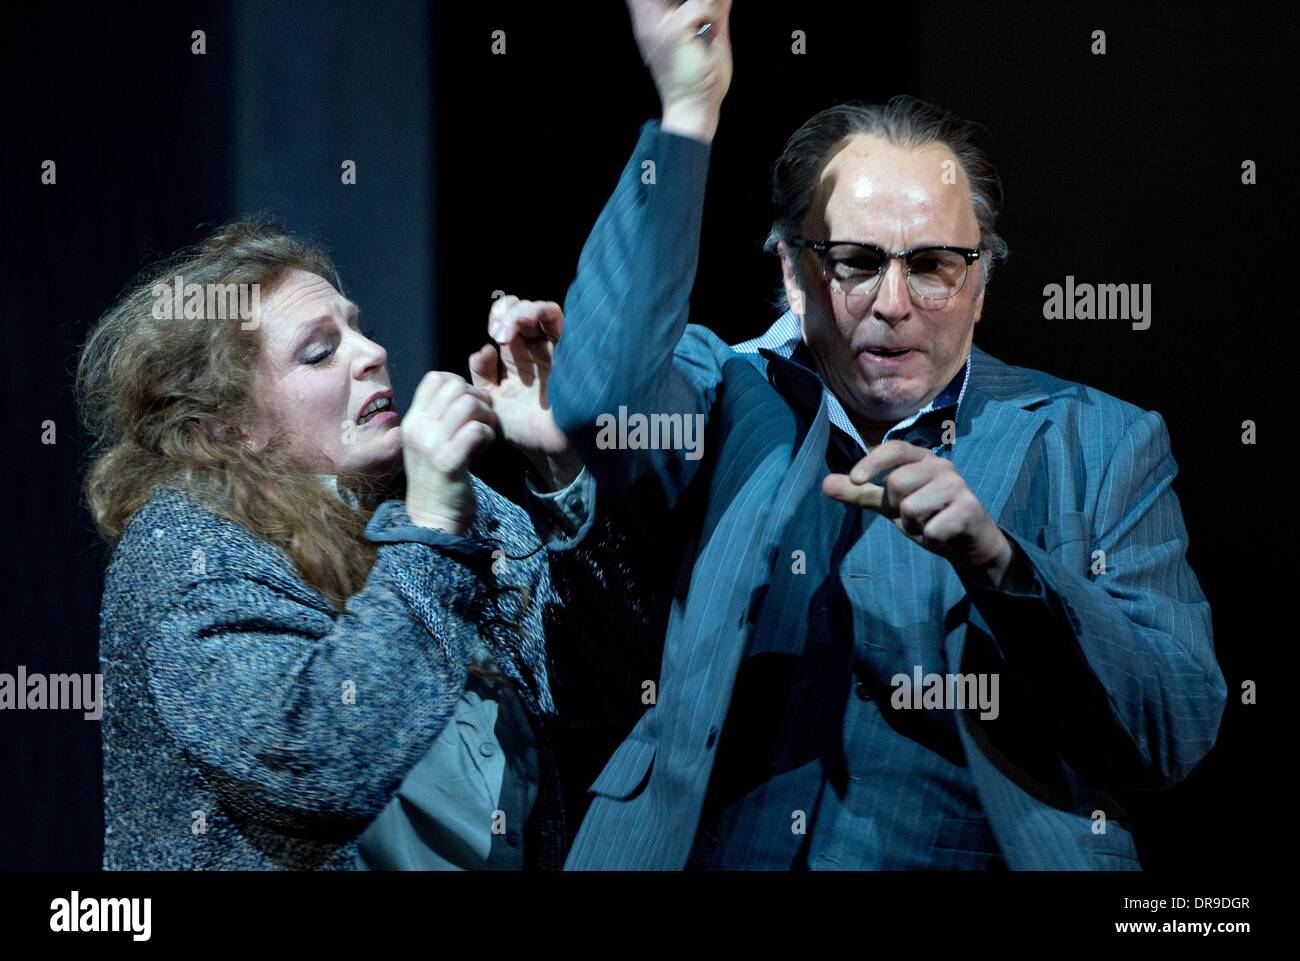 Berlin, Germany. 20th Jan, 2014. Dutch soprano Eva-Maria Westbroek (Kat'a, L) and German tenor Stefan Ruegamer (her husband Tichon) perform during the rehearsal for the opera "Kat'a Kabanova" at the State Opera in the Schillertheater in Berlin, Germany, 20 January 2014. The opera directed by Leos Janacek will premiere on 25 January 2014. Photo: SOEREN STACHE/dpa/Alamy Live News Stock Photo